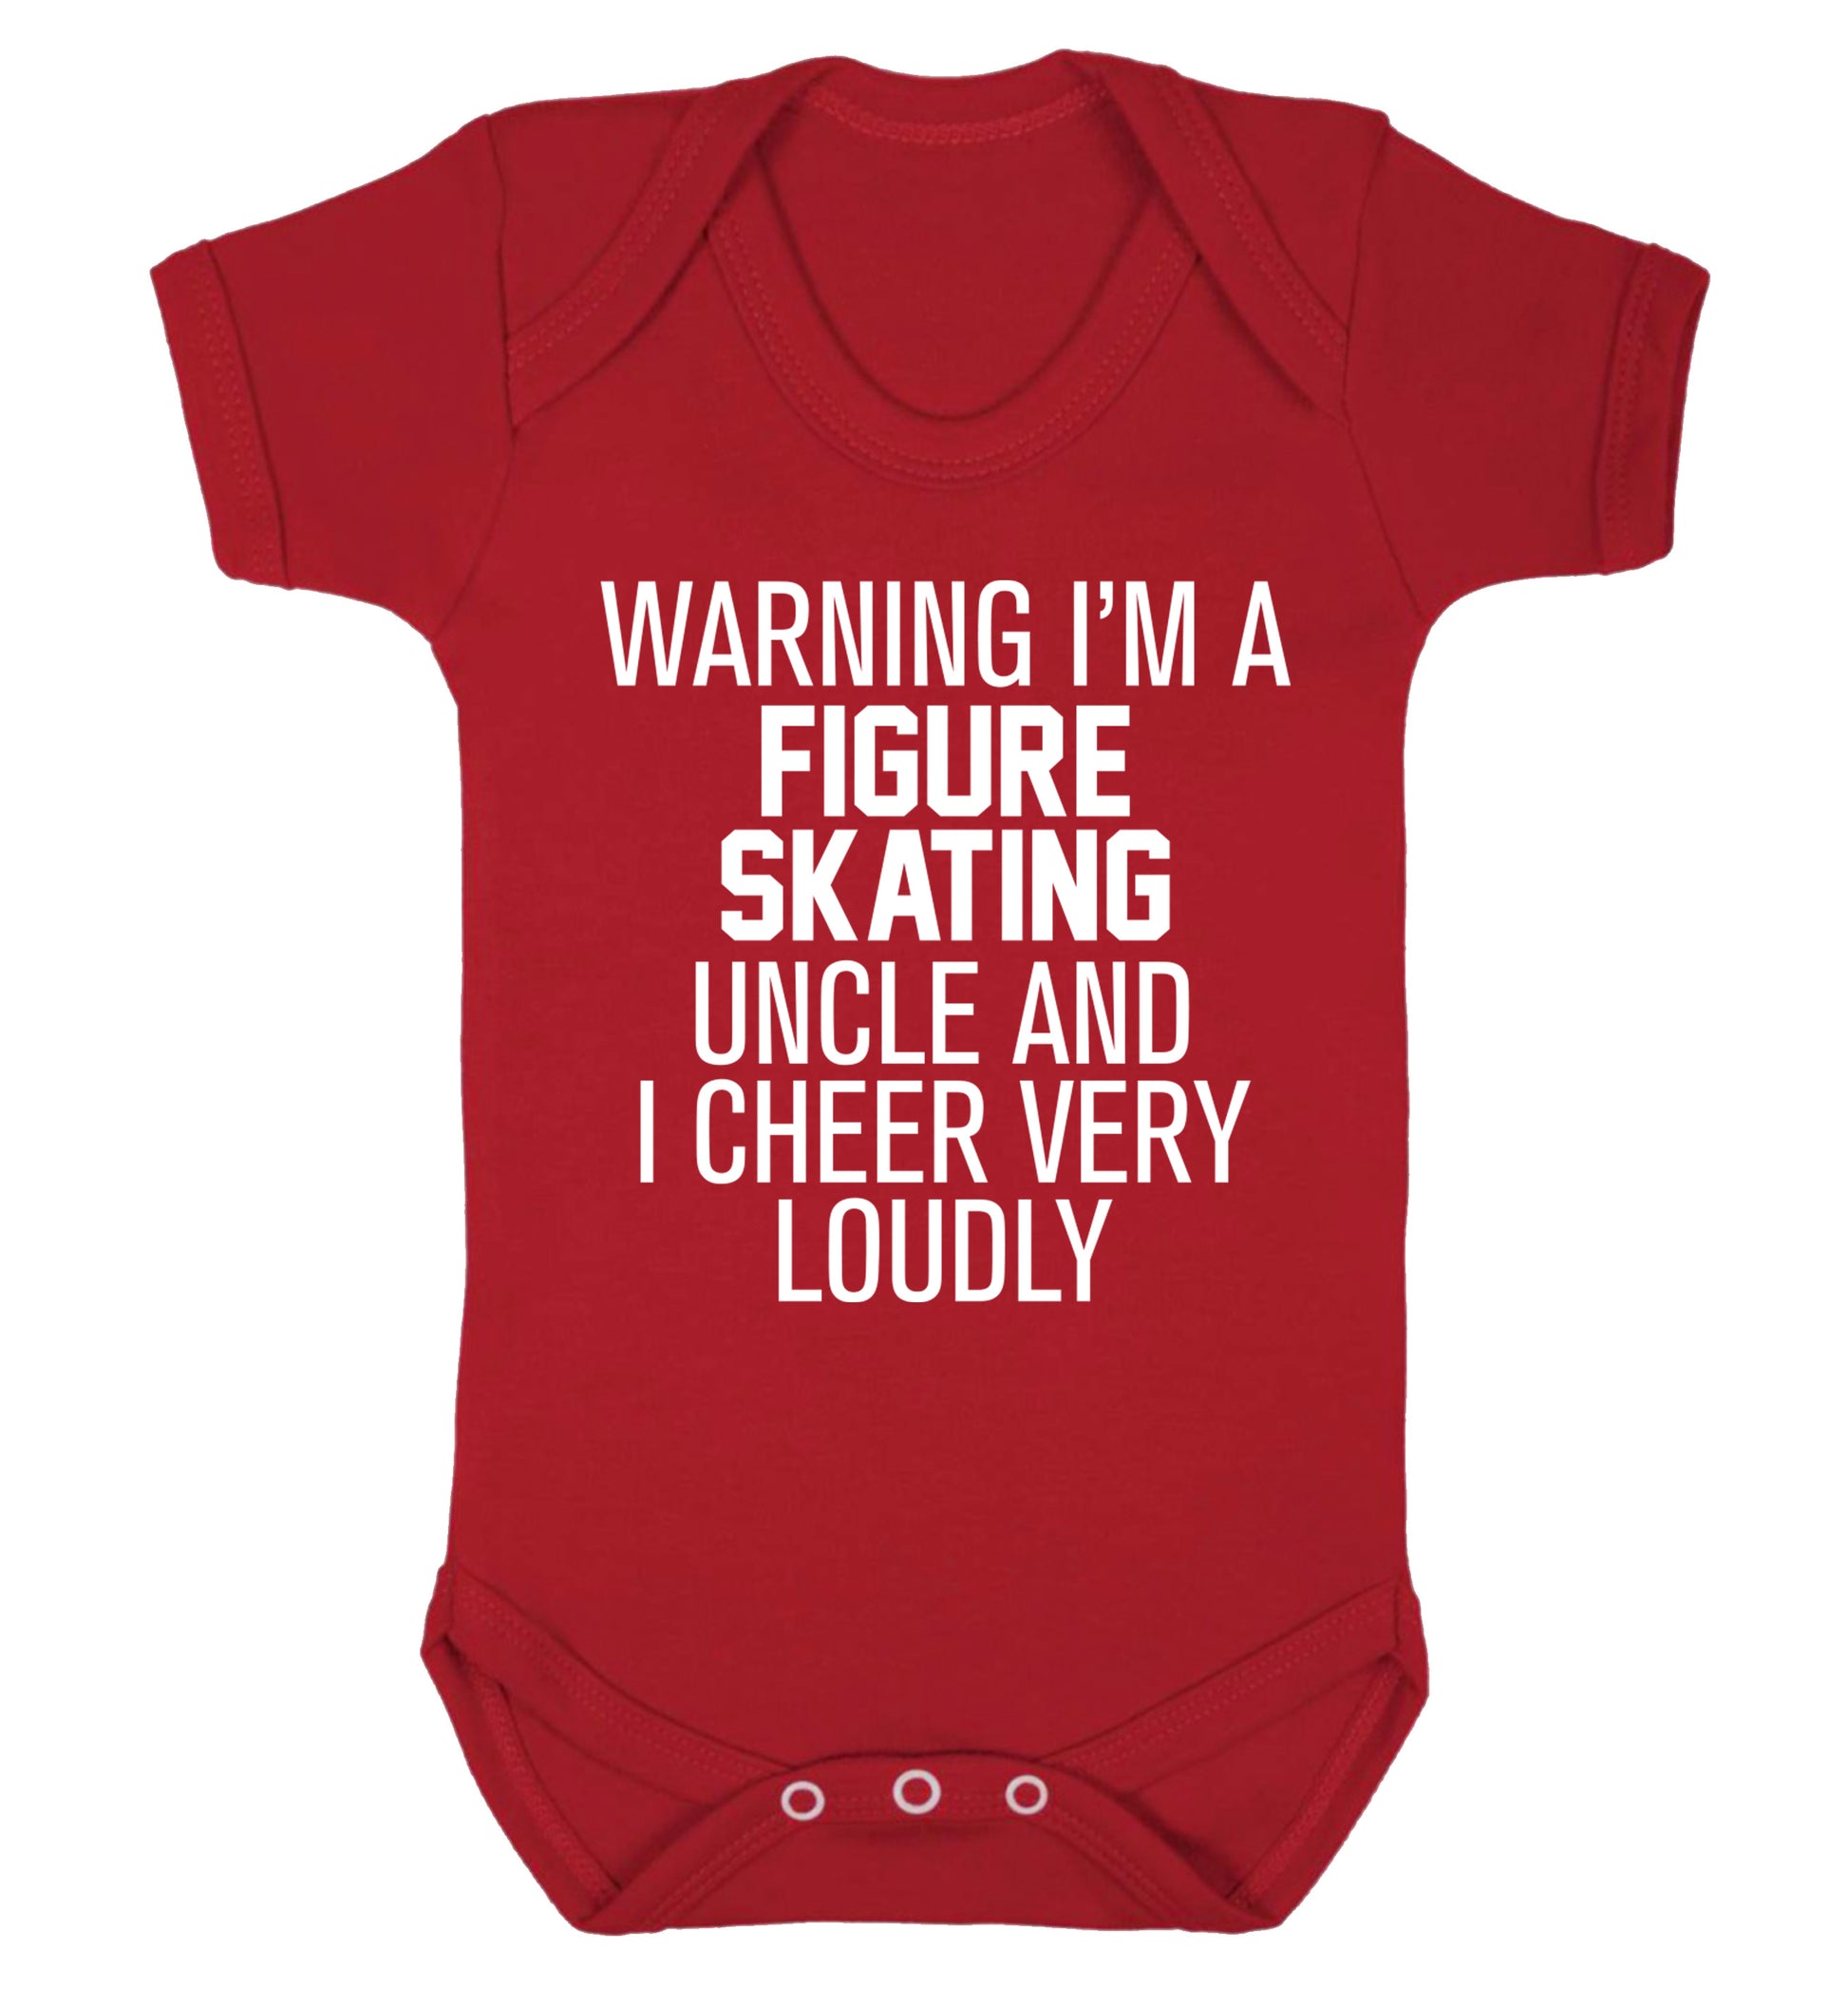 Warning I'm a figure skating uncle and I cheer very loudly Baby Vest red 18-24 months